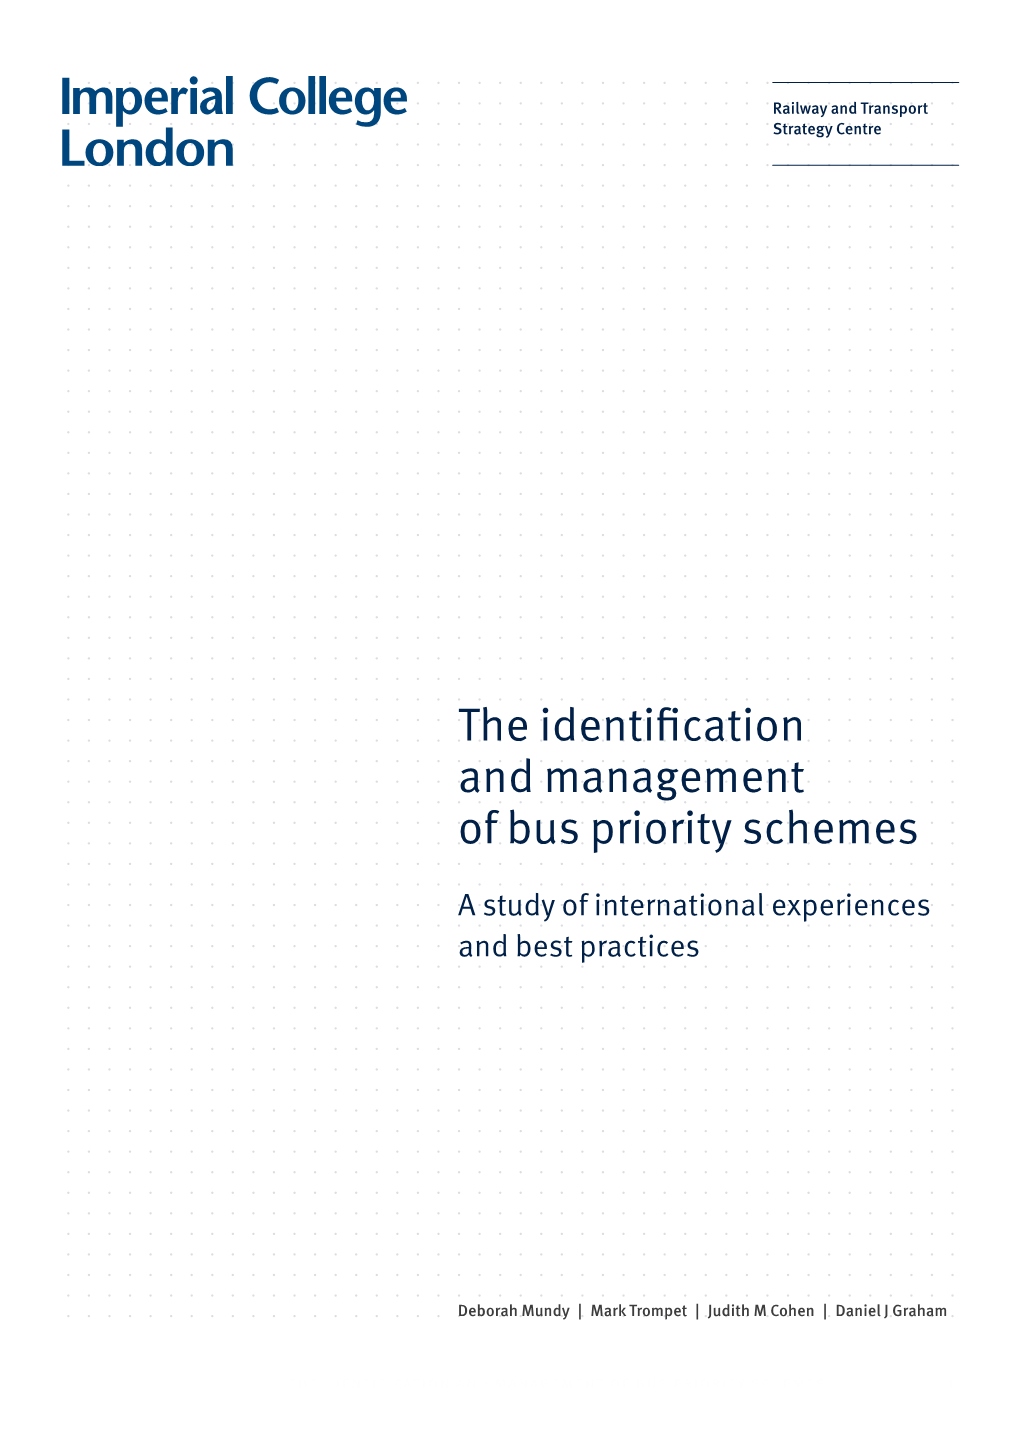 The Identification and Management of Bus Priority Schemes